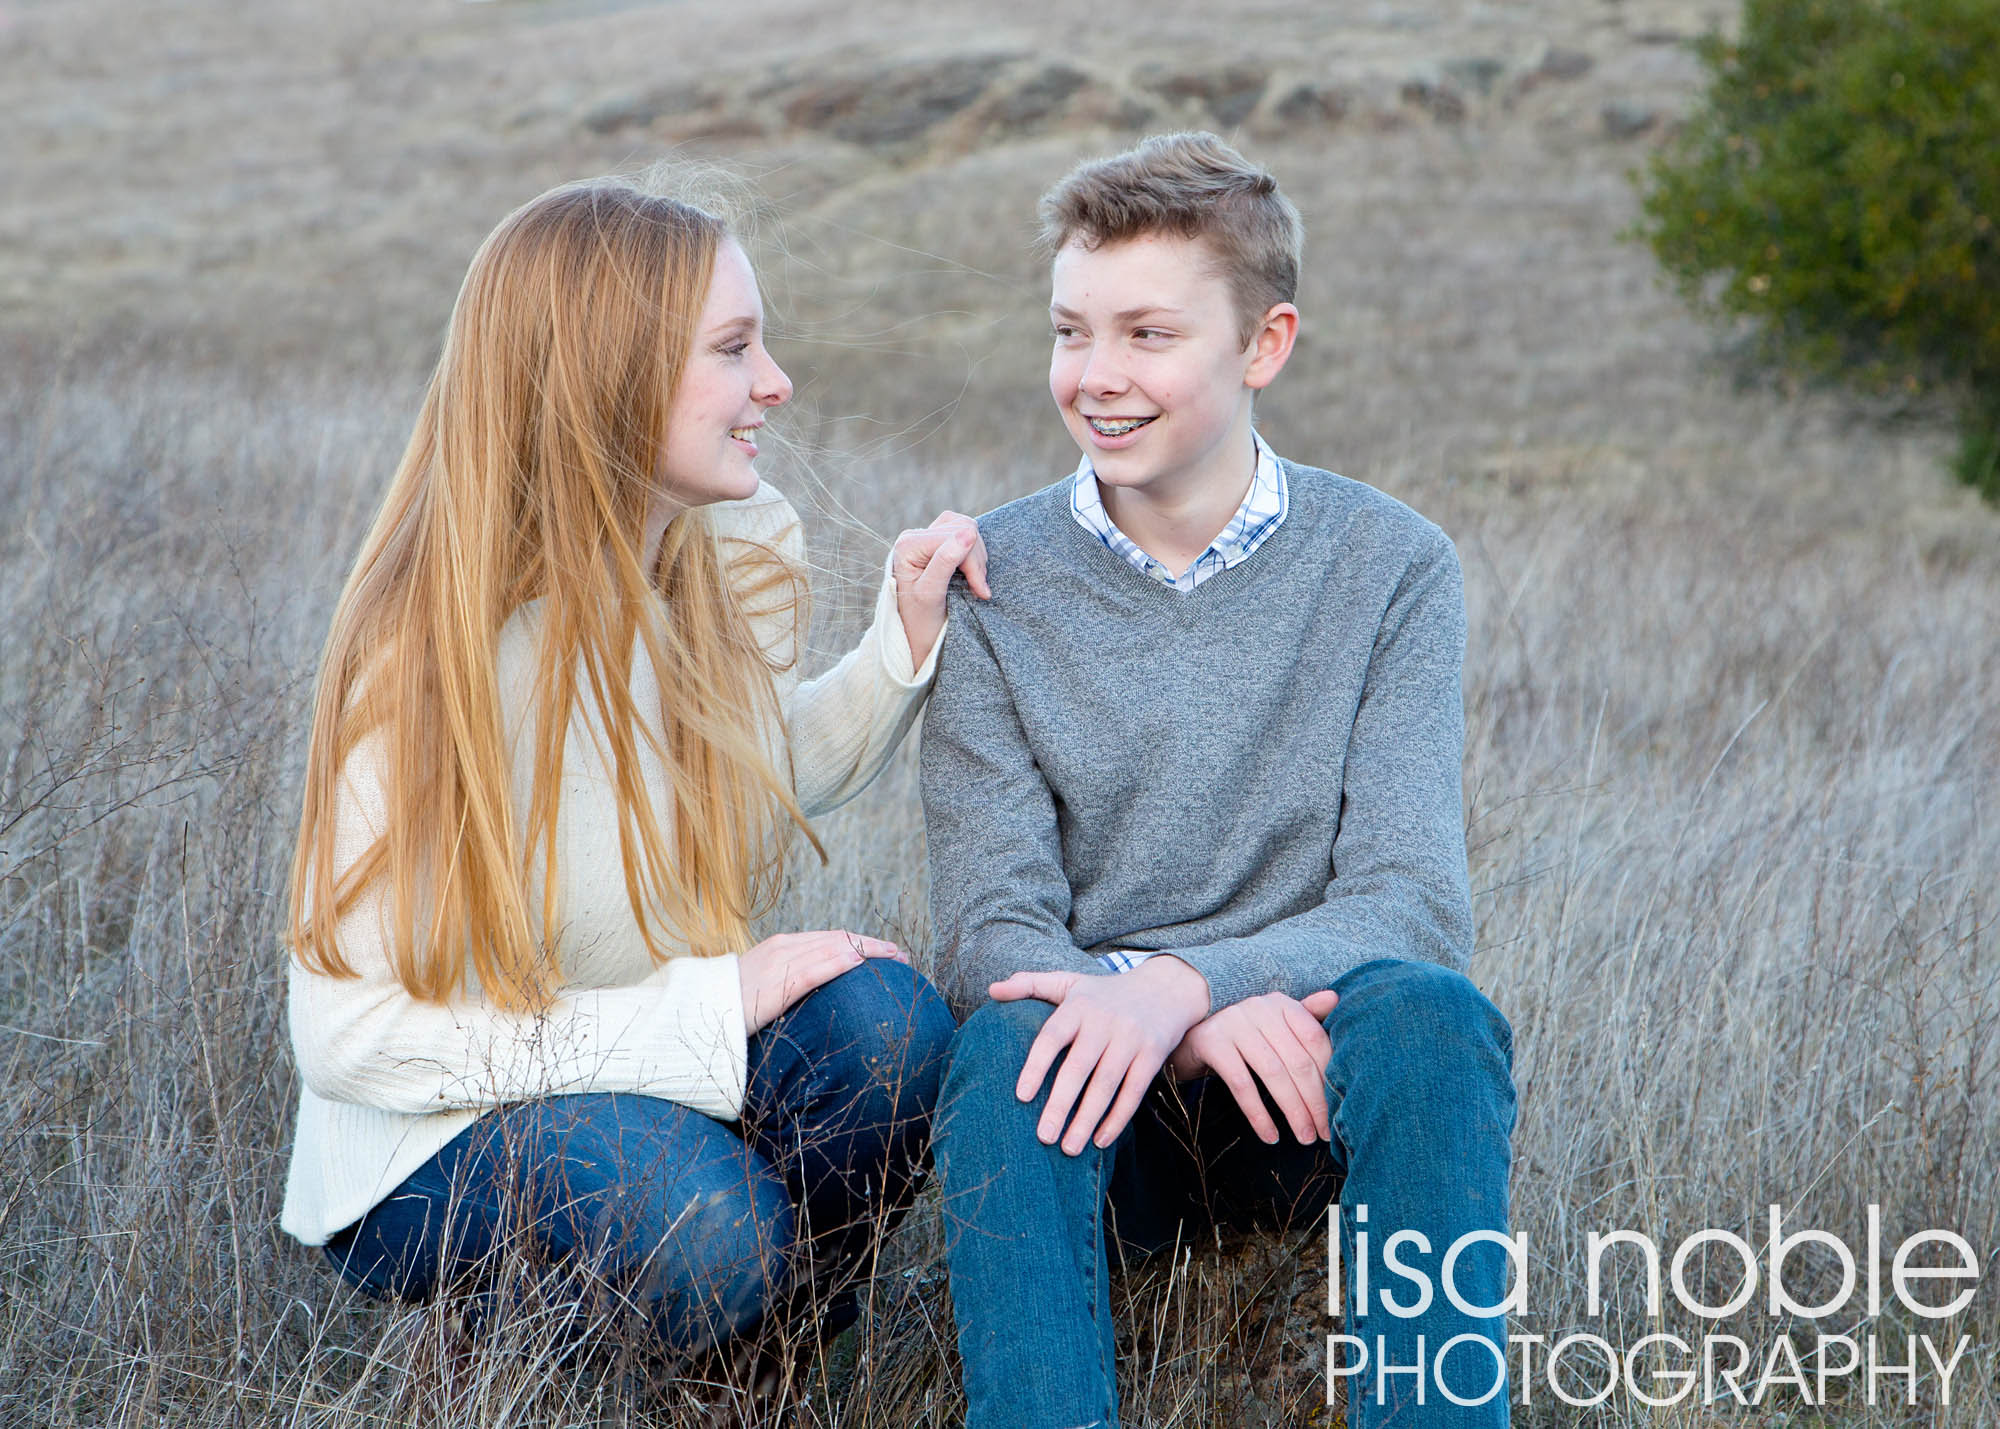 Portrait of siblings in a grass field by Bay Area professional photographer